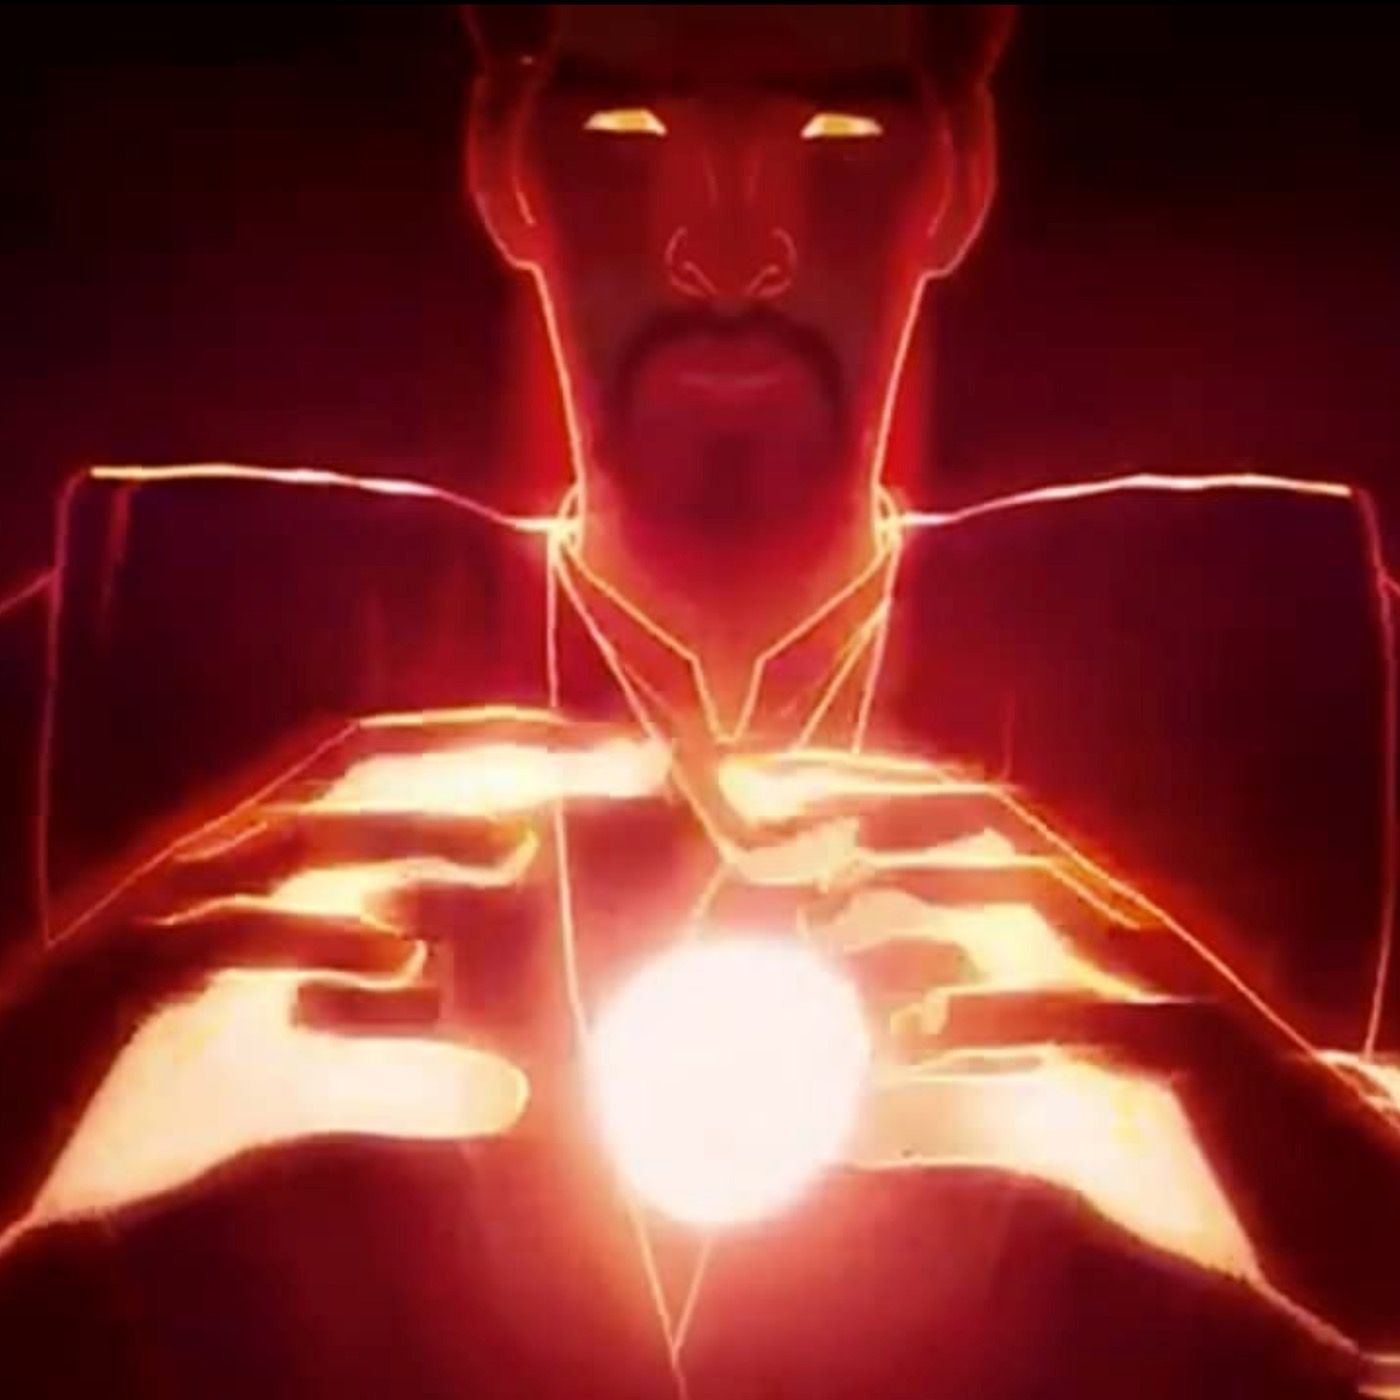 31: "What If... Doctor Strange Lost His Heart Instead of His Hands?" (What If...? S1E4)